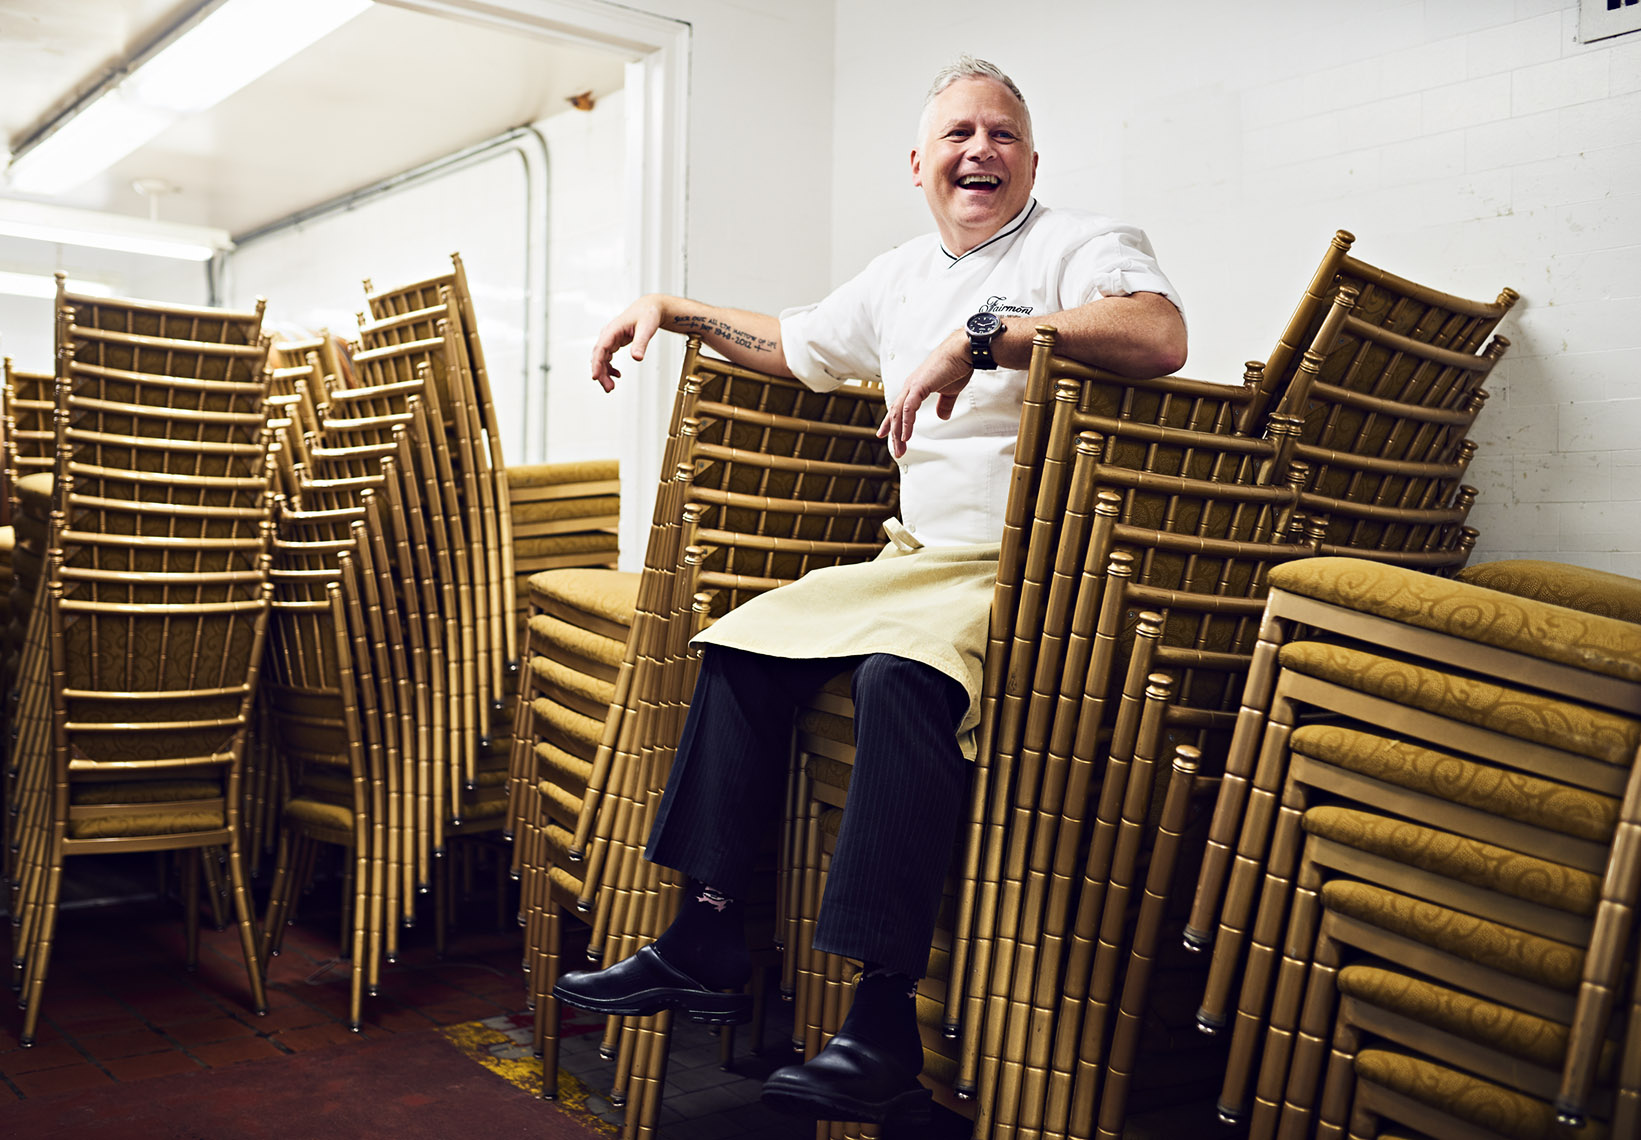 Laughing chef sitting on piled chairs and looking off